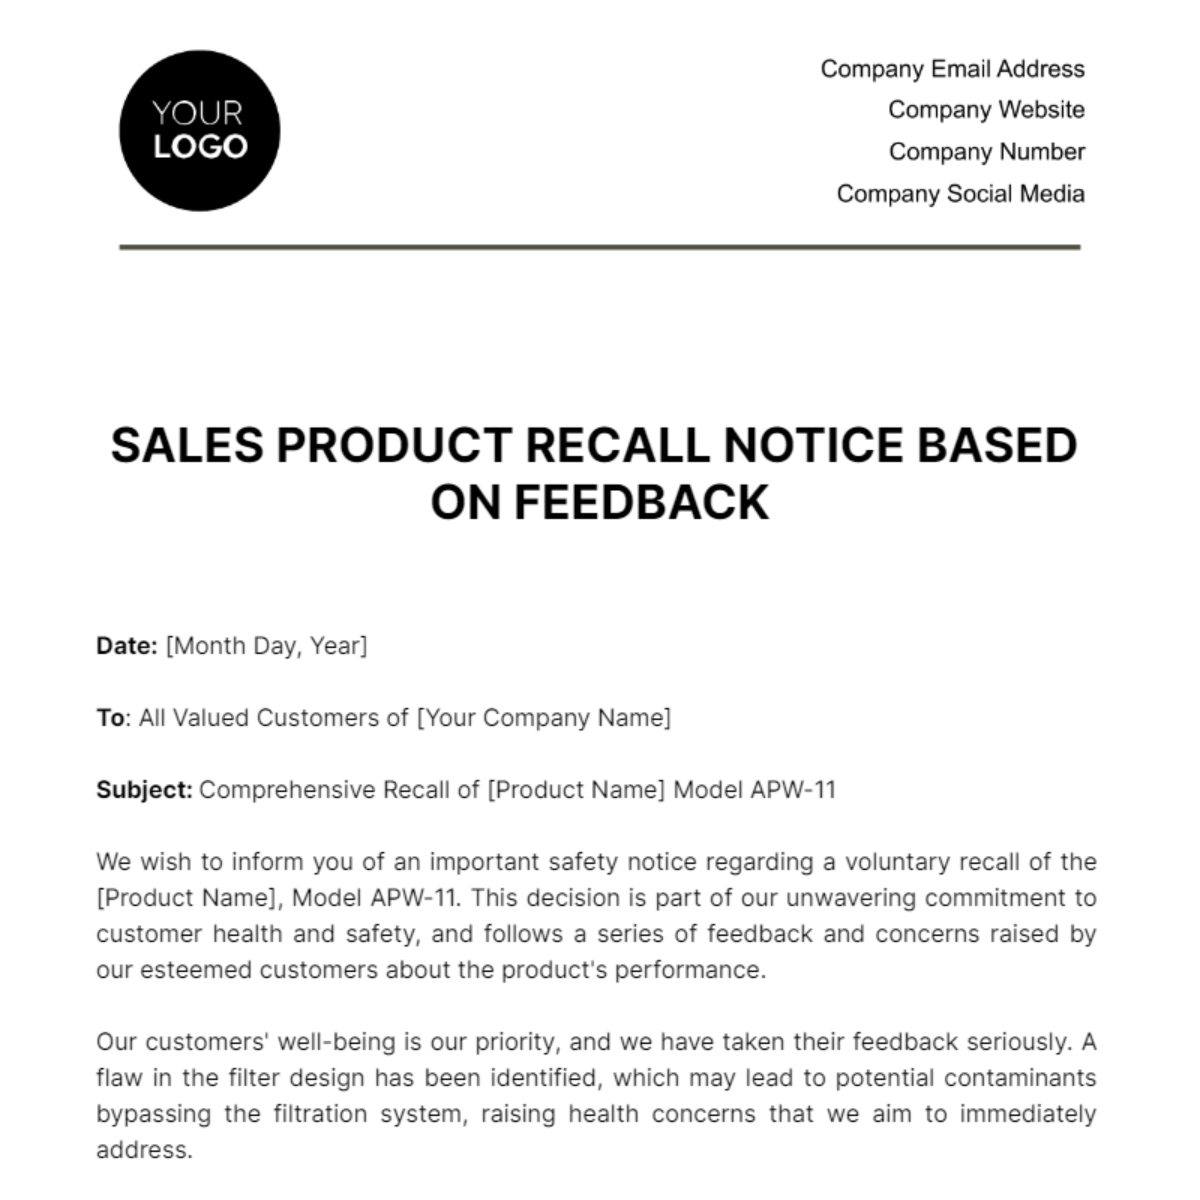 Sales Product Recall Notice Based on Feedback Template